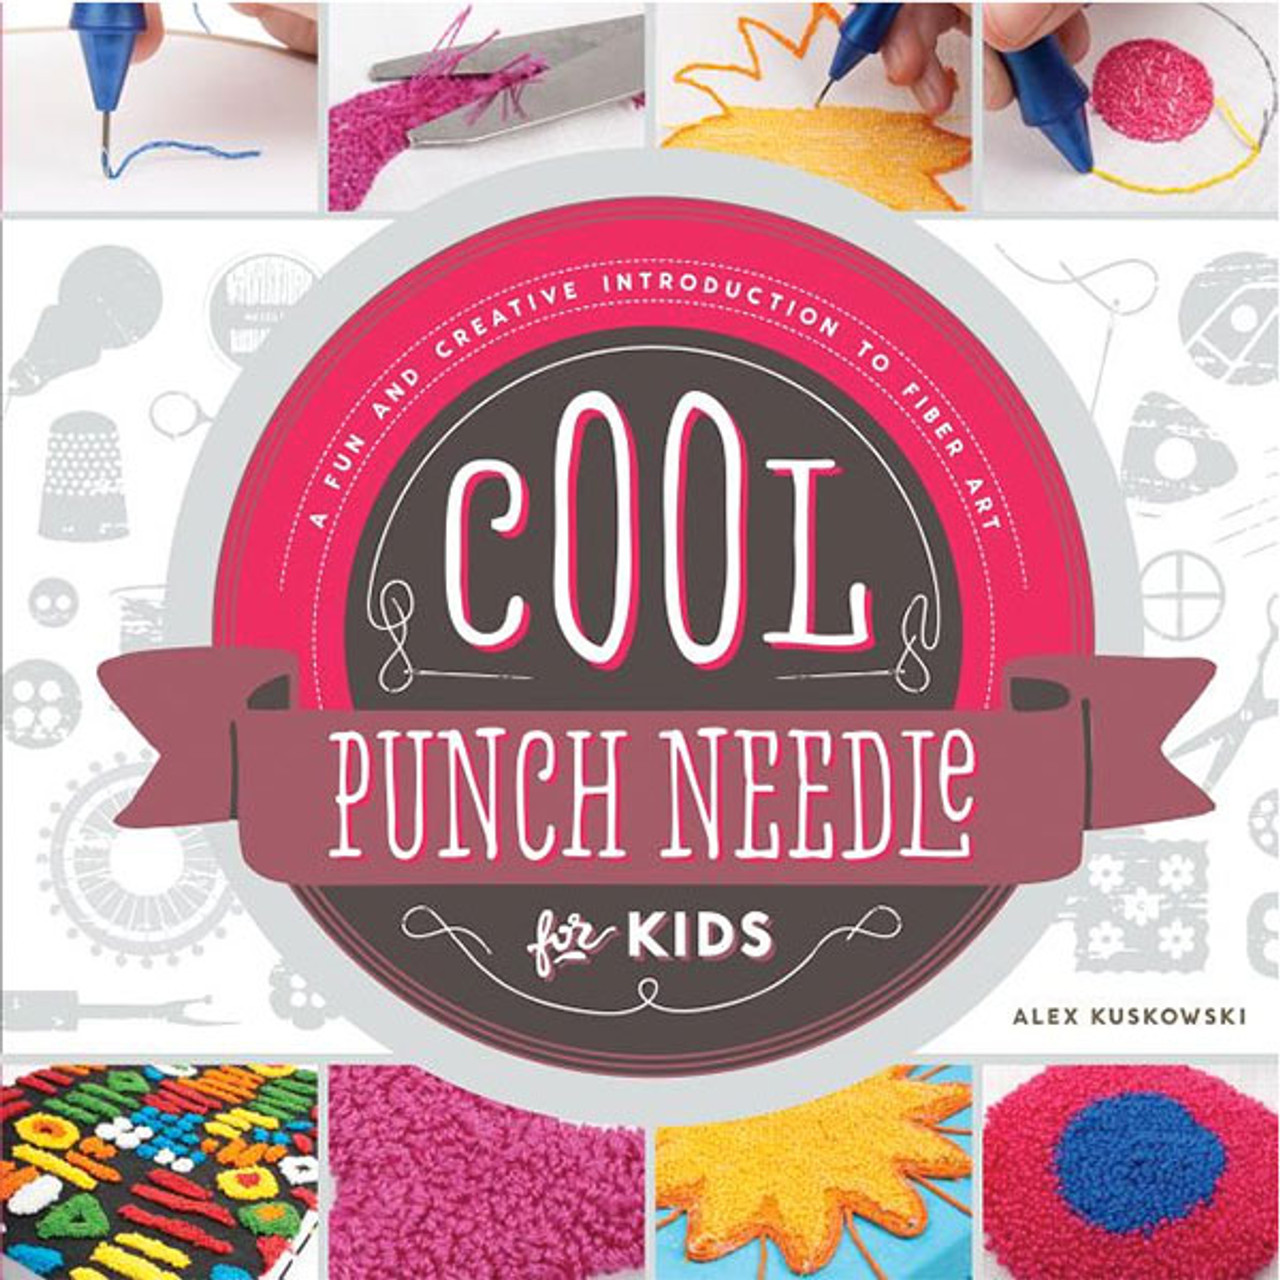 An Introduction to Punch Needle 